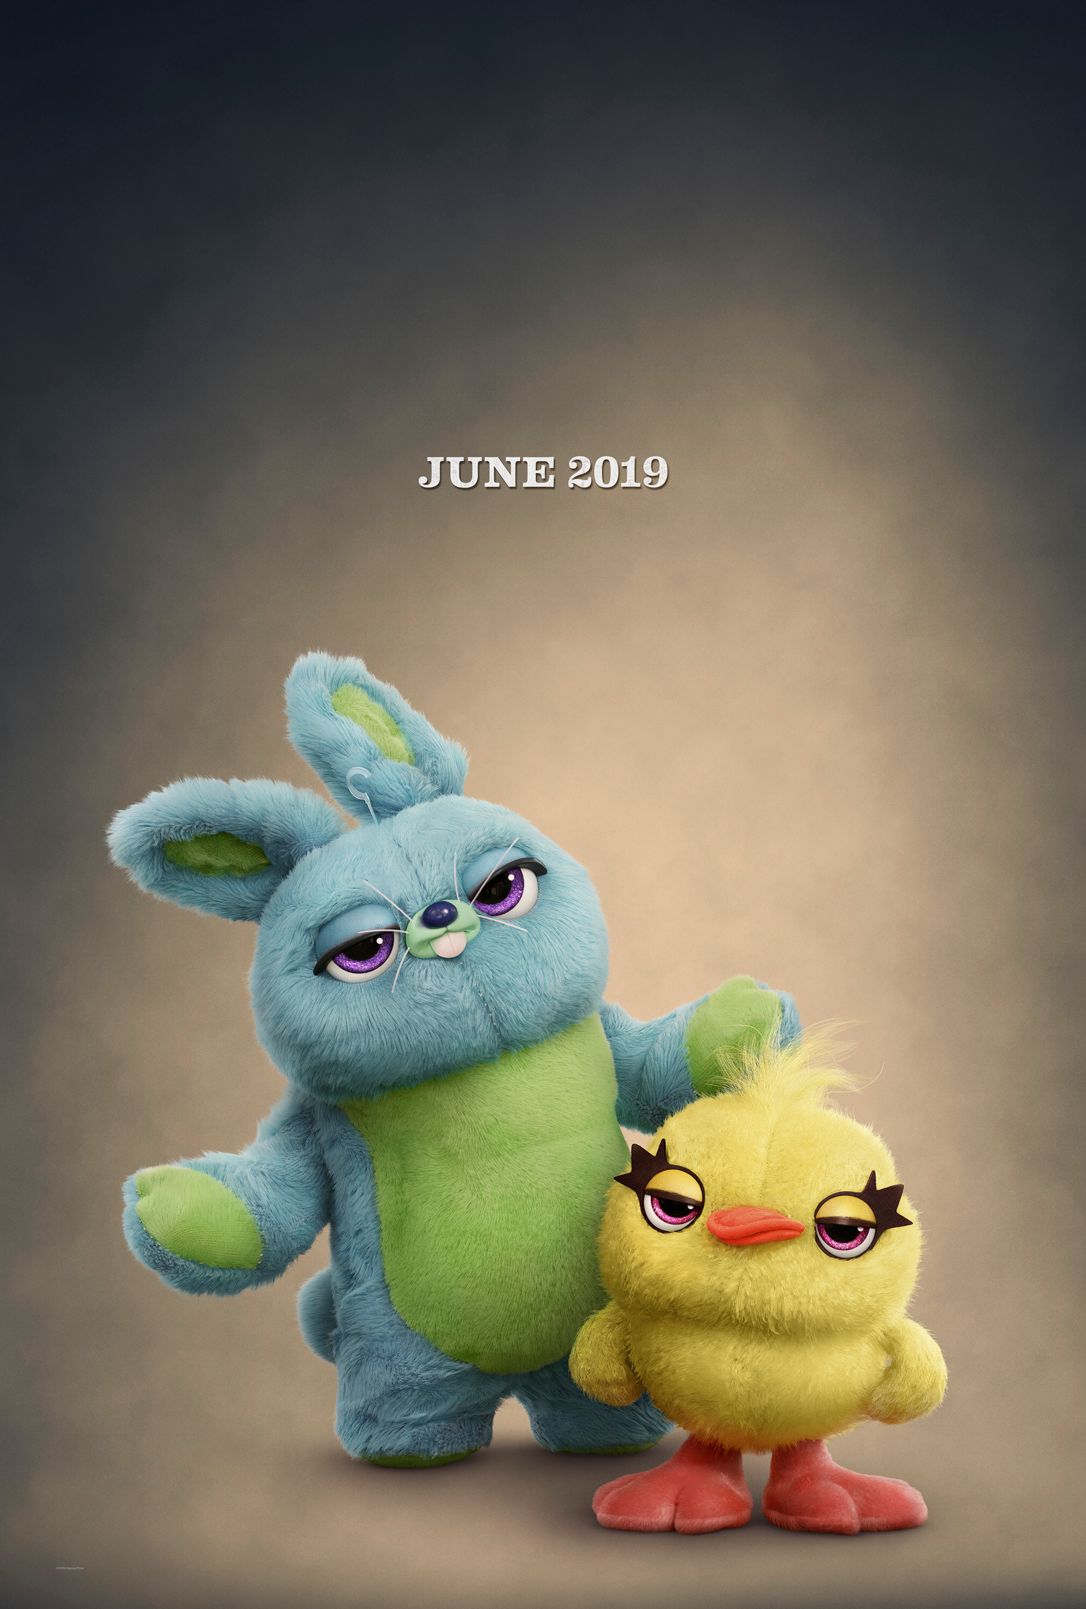 Toy Story 4 Ducky and Bunny poster